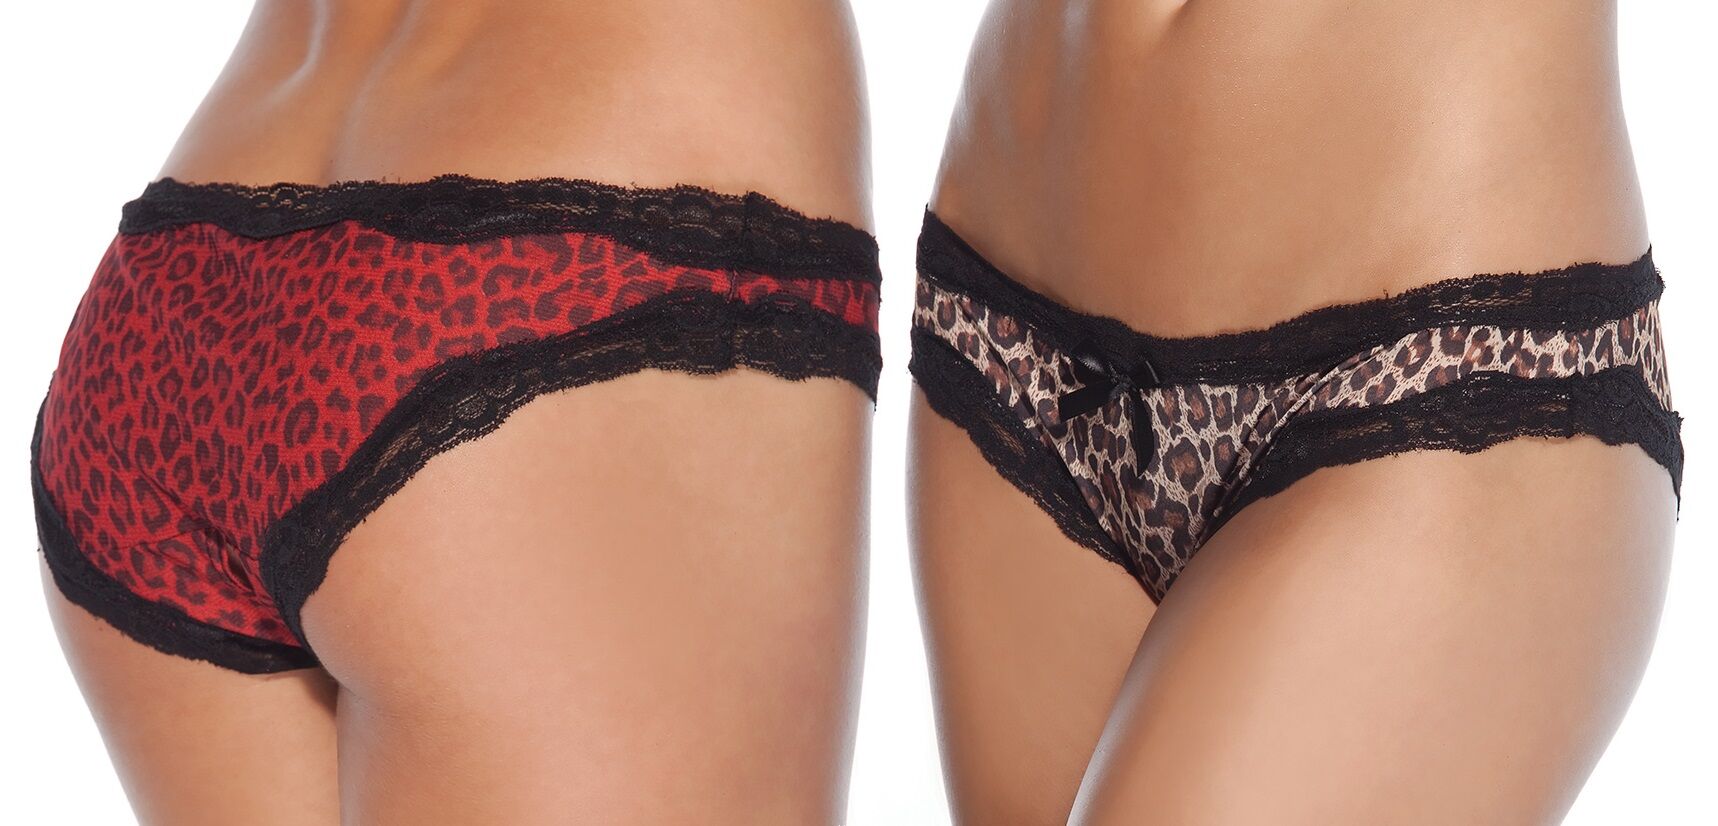 Crotchless Leopard Panty Lace Trim and Bow